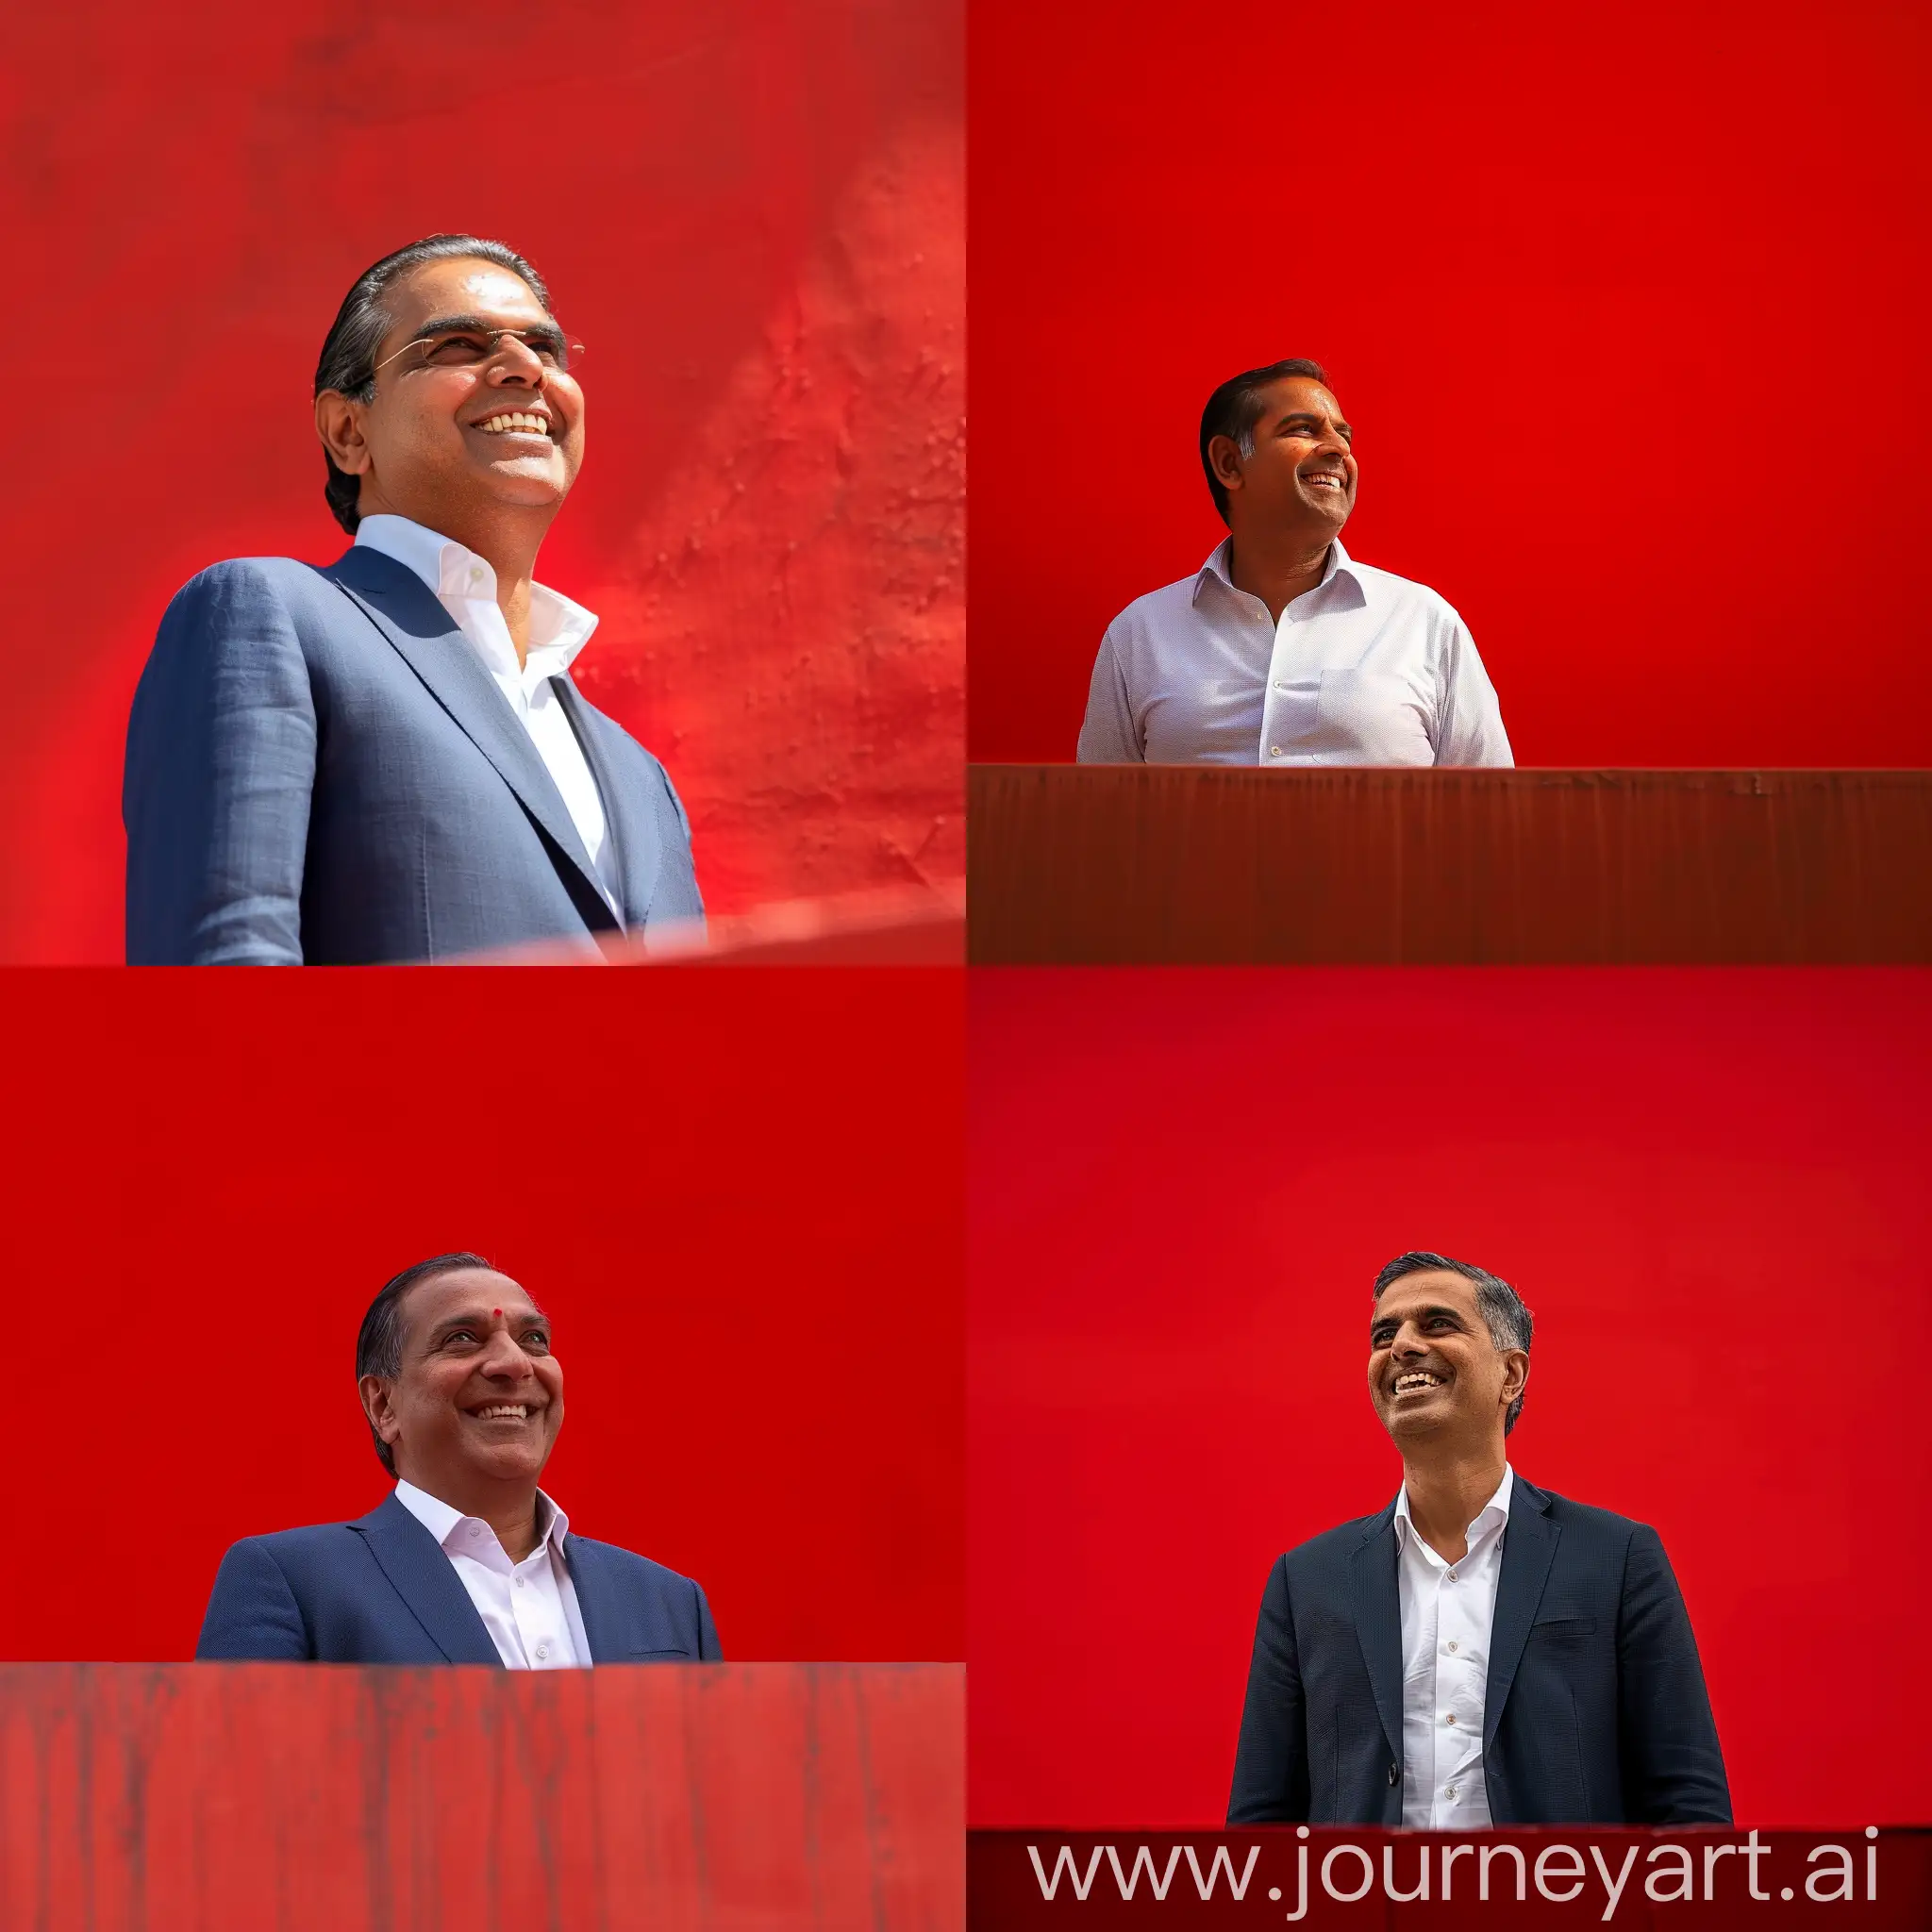 Anand Ambani, an Indian billionaire, stands smiling from the edge, with a red background against him